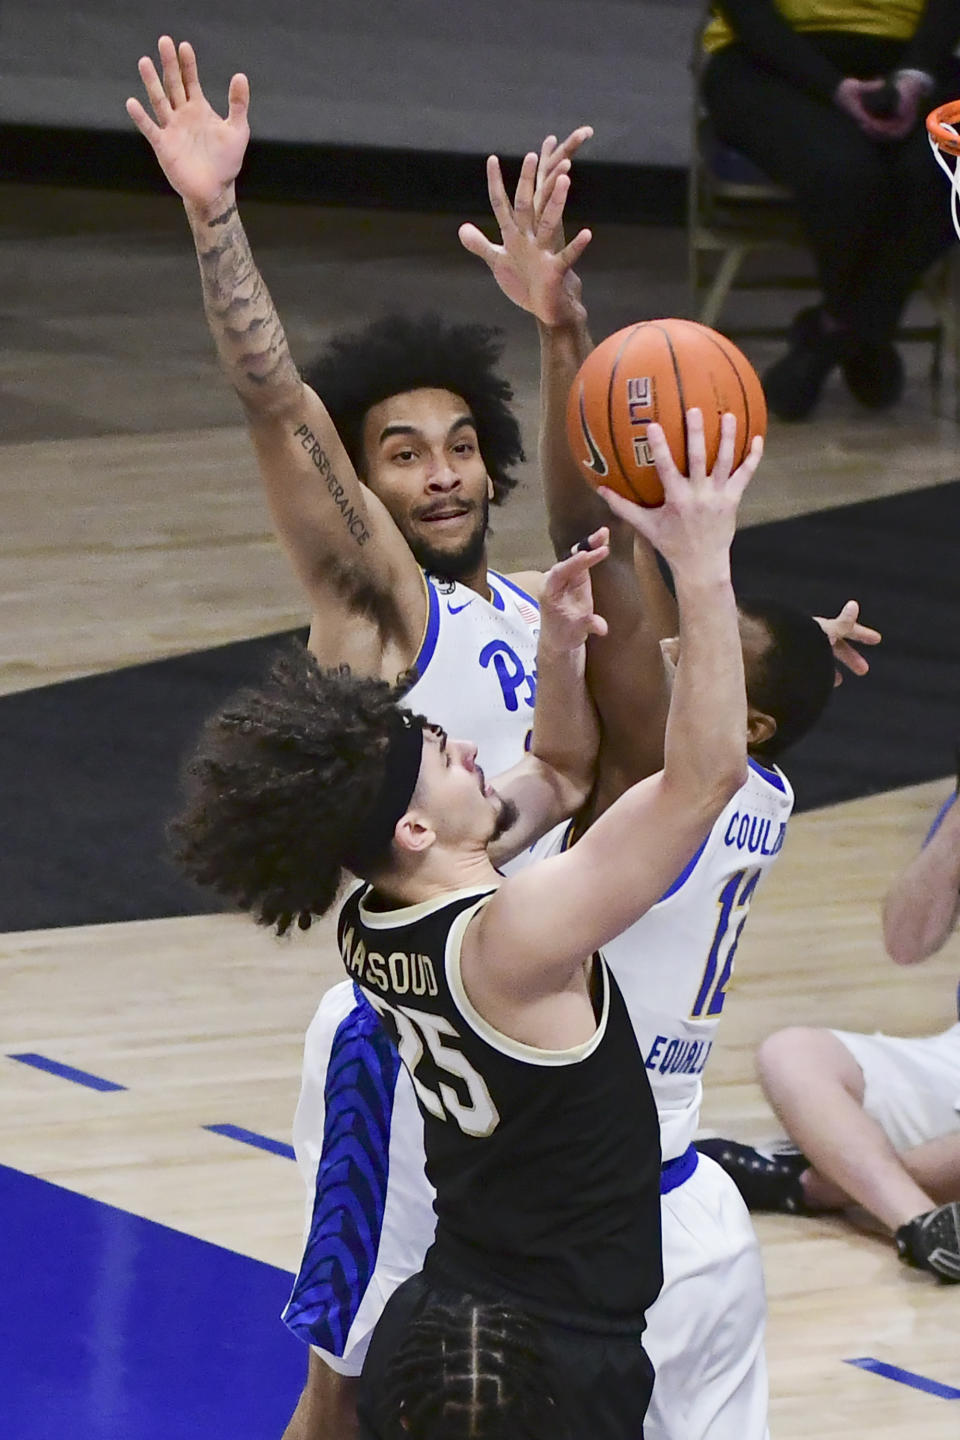 Wake Forest forward Ismael Massoud drives past Pittsburgh forward Justin Champagnie during the first half of an NCAA college basketball game, Tuesday, March 2, 2021, in Pittsburgh. (AP Photo/Fred Vuich)